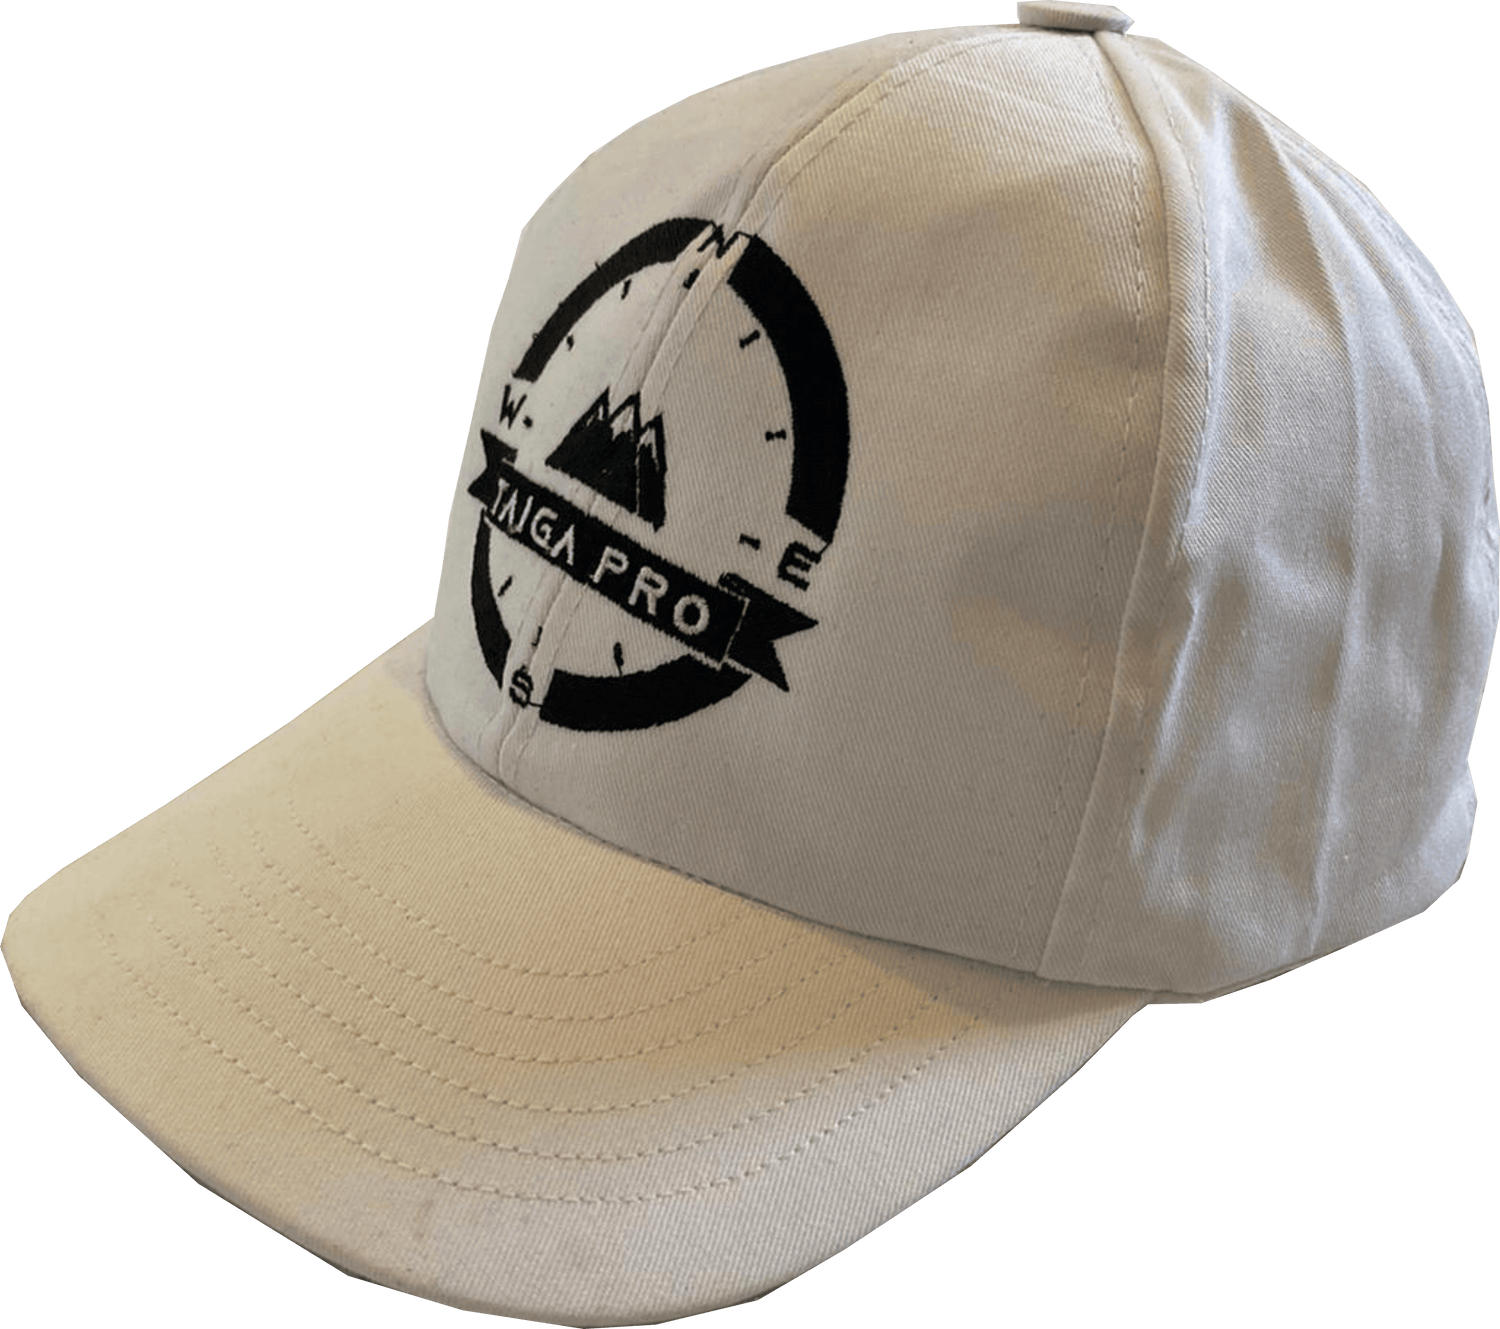 White taiga pro baseball cap with a black taiga pro logo embroidery on the front of the cap. 